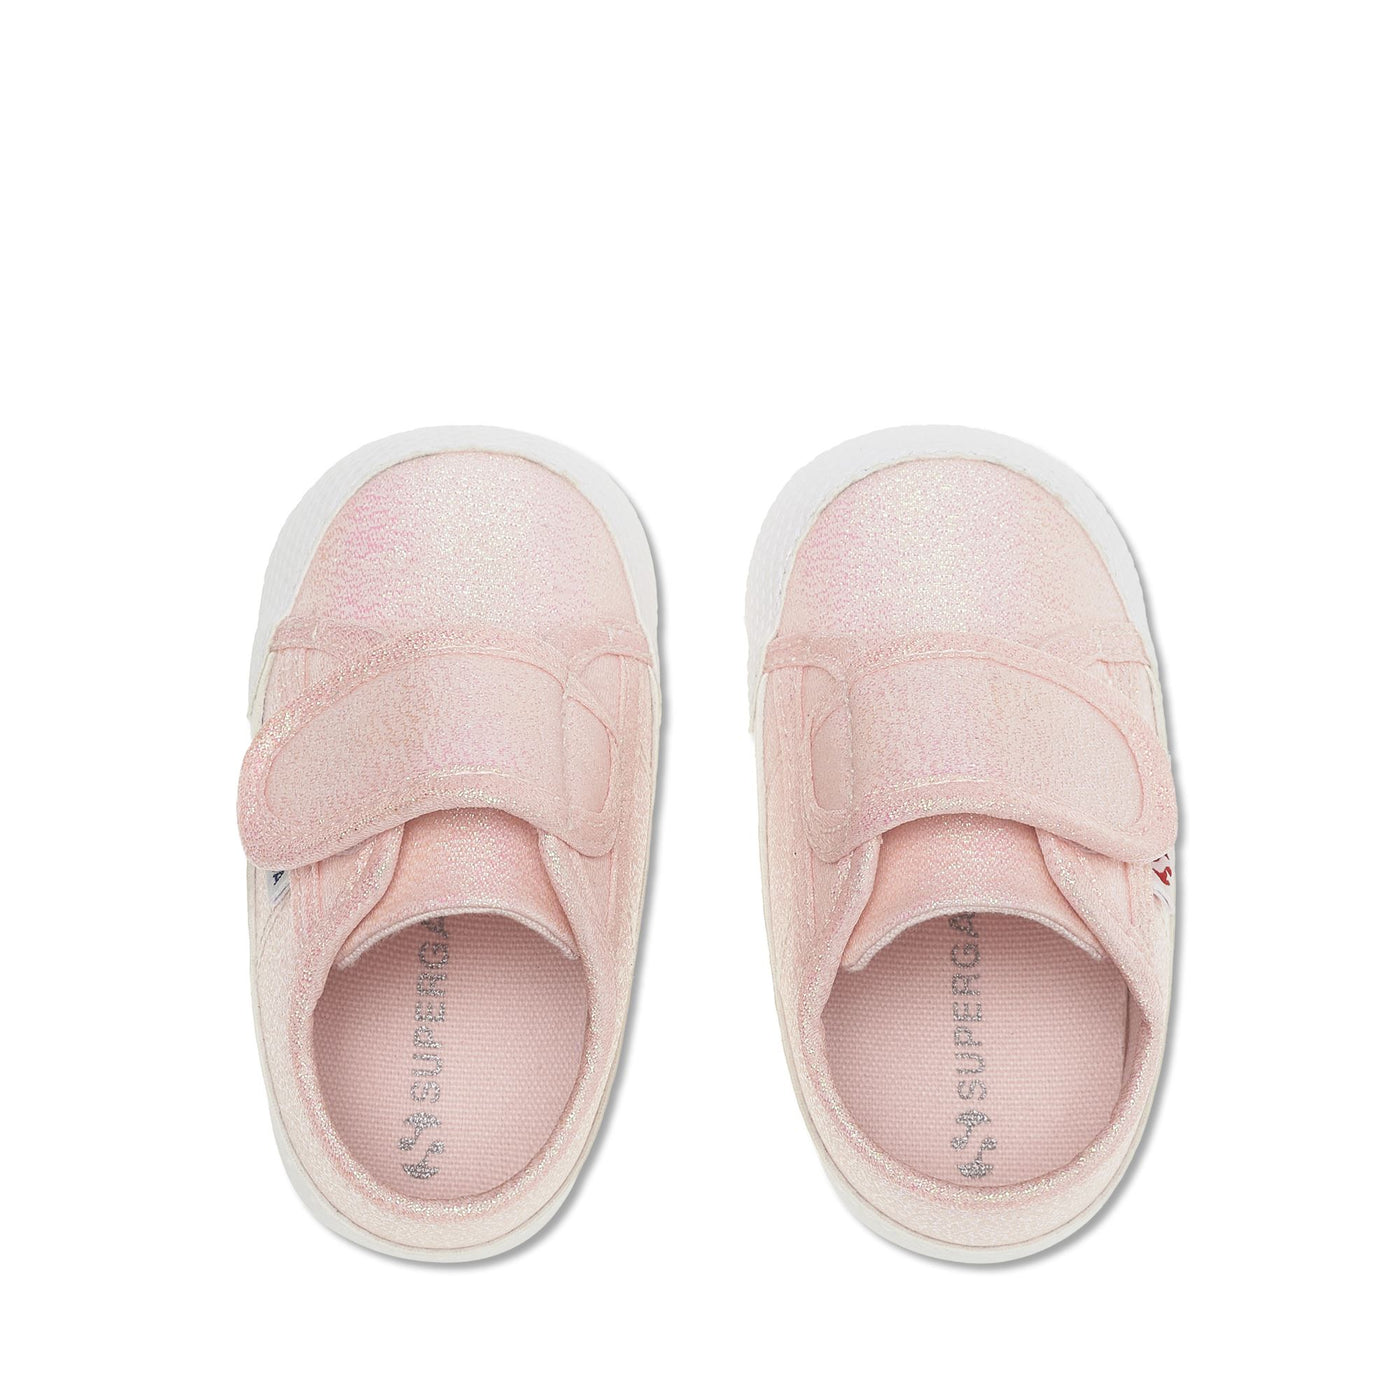 Sneakers Girl 4006 BABY STRAP LAME Low Cut PINK ISH IRIDESCENT Dressed Back (jpg Rgb)		